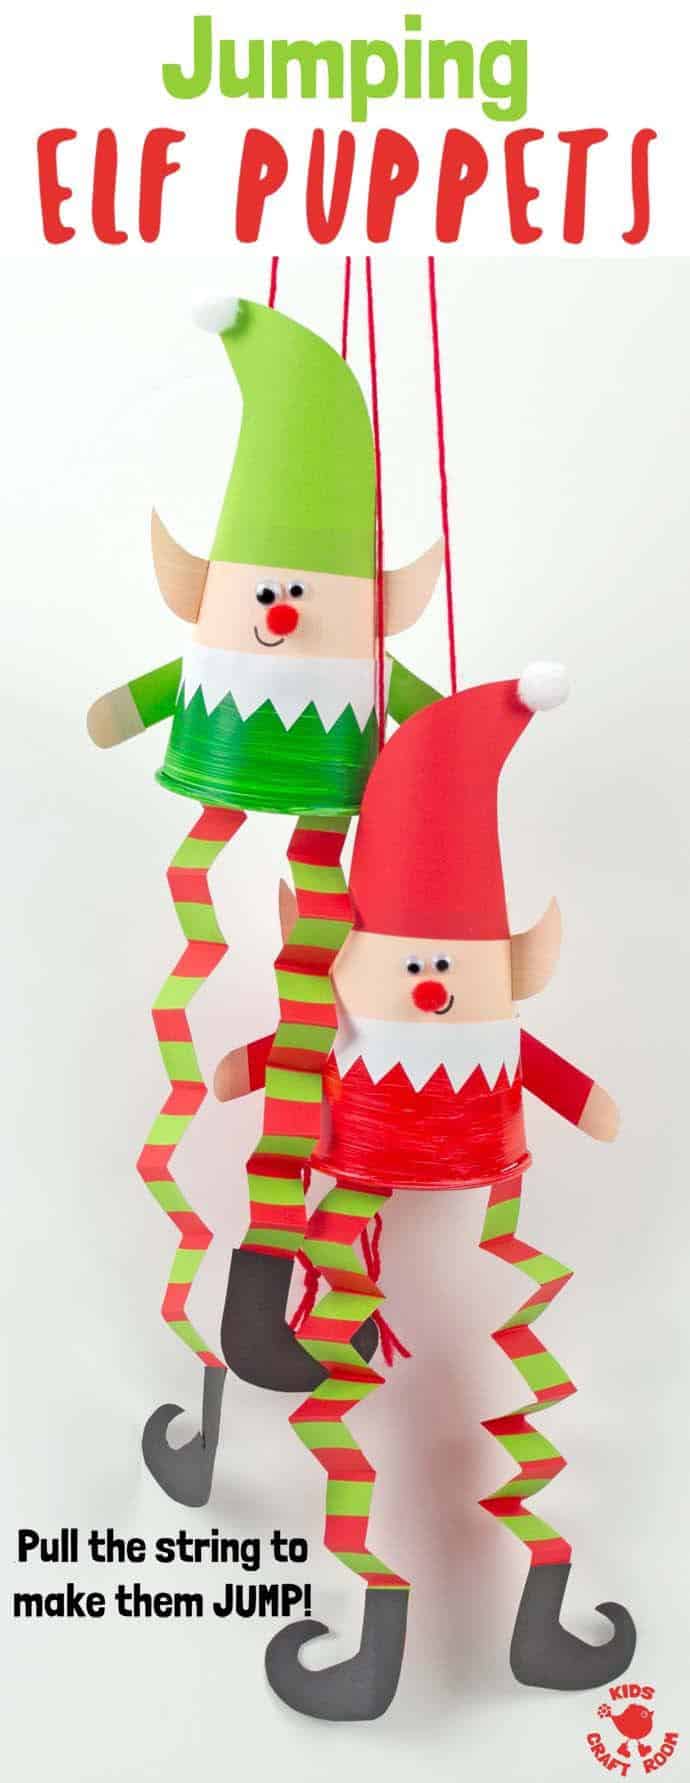 This Jumping Paper Cup Elf Puppet Craft is so much fun. Pull the string to watch the elves leap up and down! Such a cute interactive Christmas craft for kids. #elves #elf #christmas #christmascrafts #christmascraftsforkids #elfcrafts #papercupcrafts #christmasornaments #christmastoys #toys #kidscraftroom #elfontheshelf 